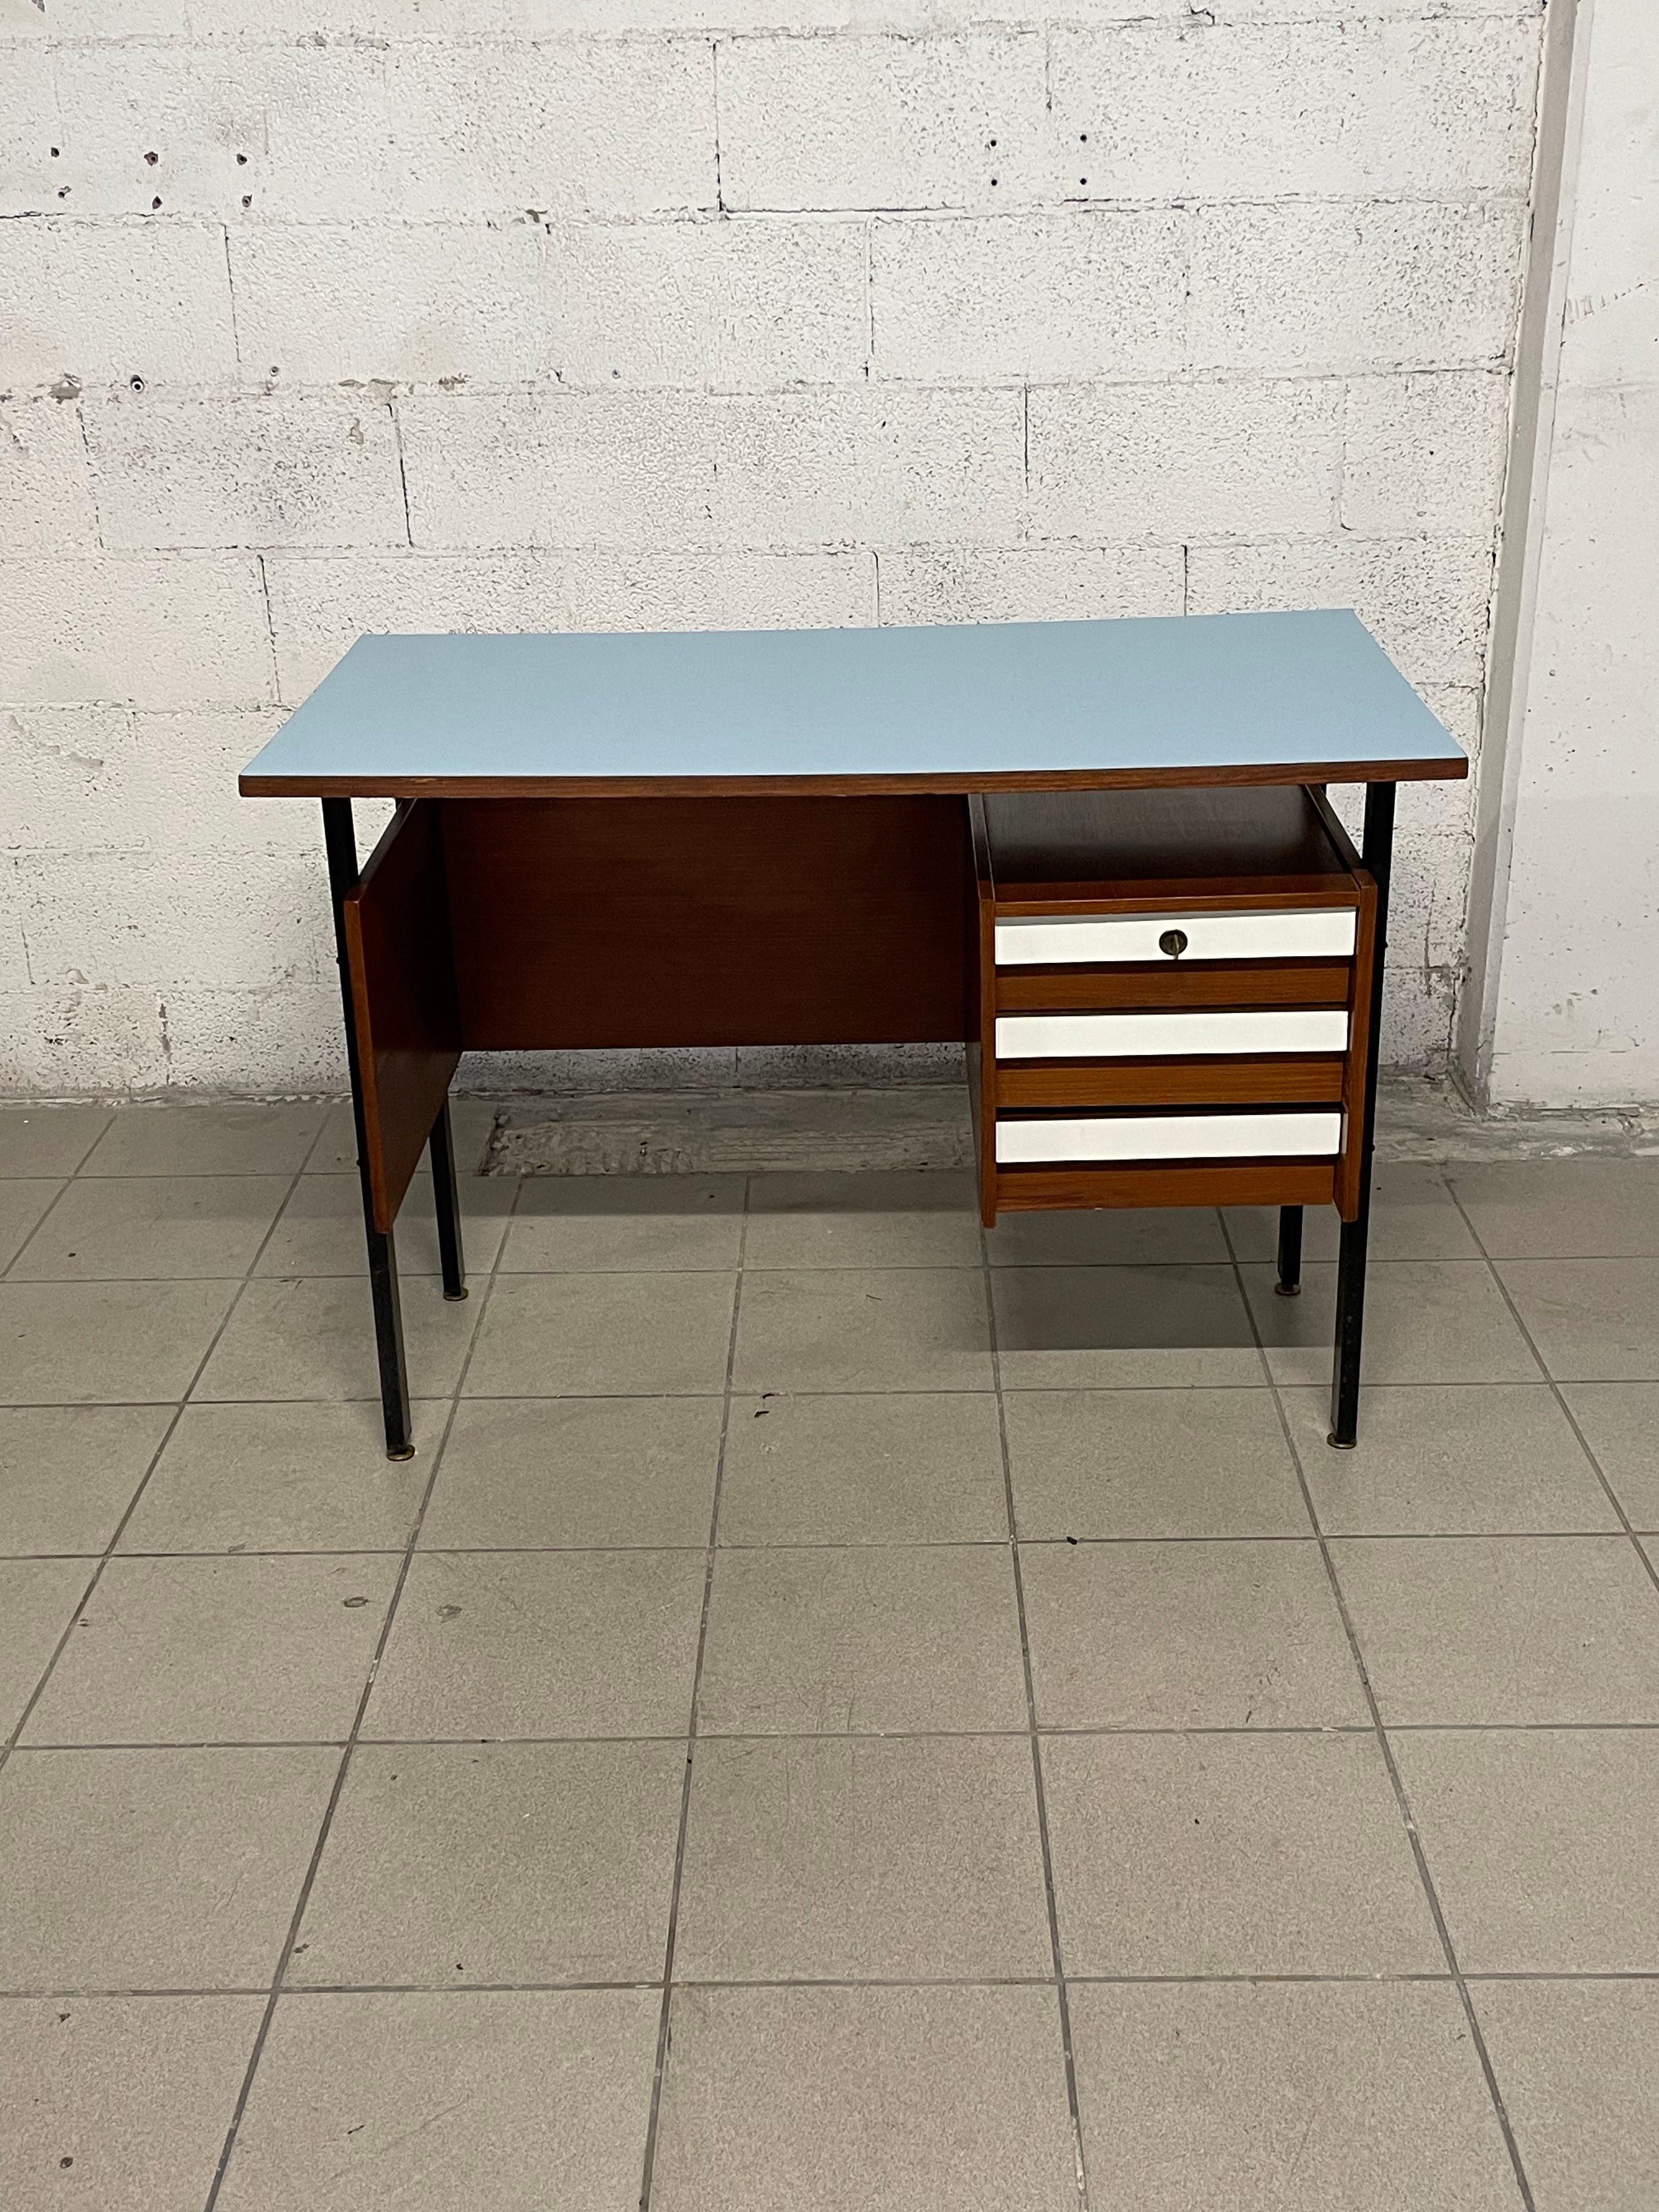 1960s teak wood desk with blue formica top.

On the right side are three small drawers with white formica fronts.
Black iron supports with adjustable brass feet.

The desk has been recently restored and is perfect for a bedroom set or even as an